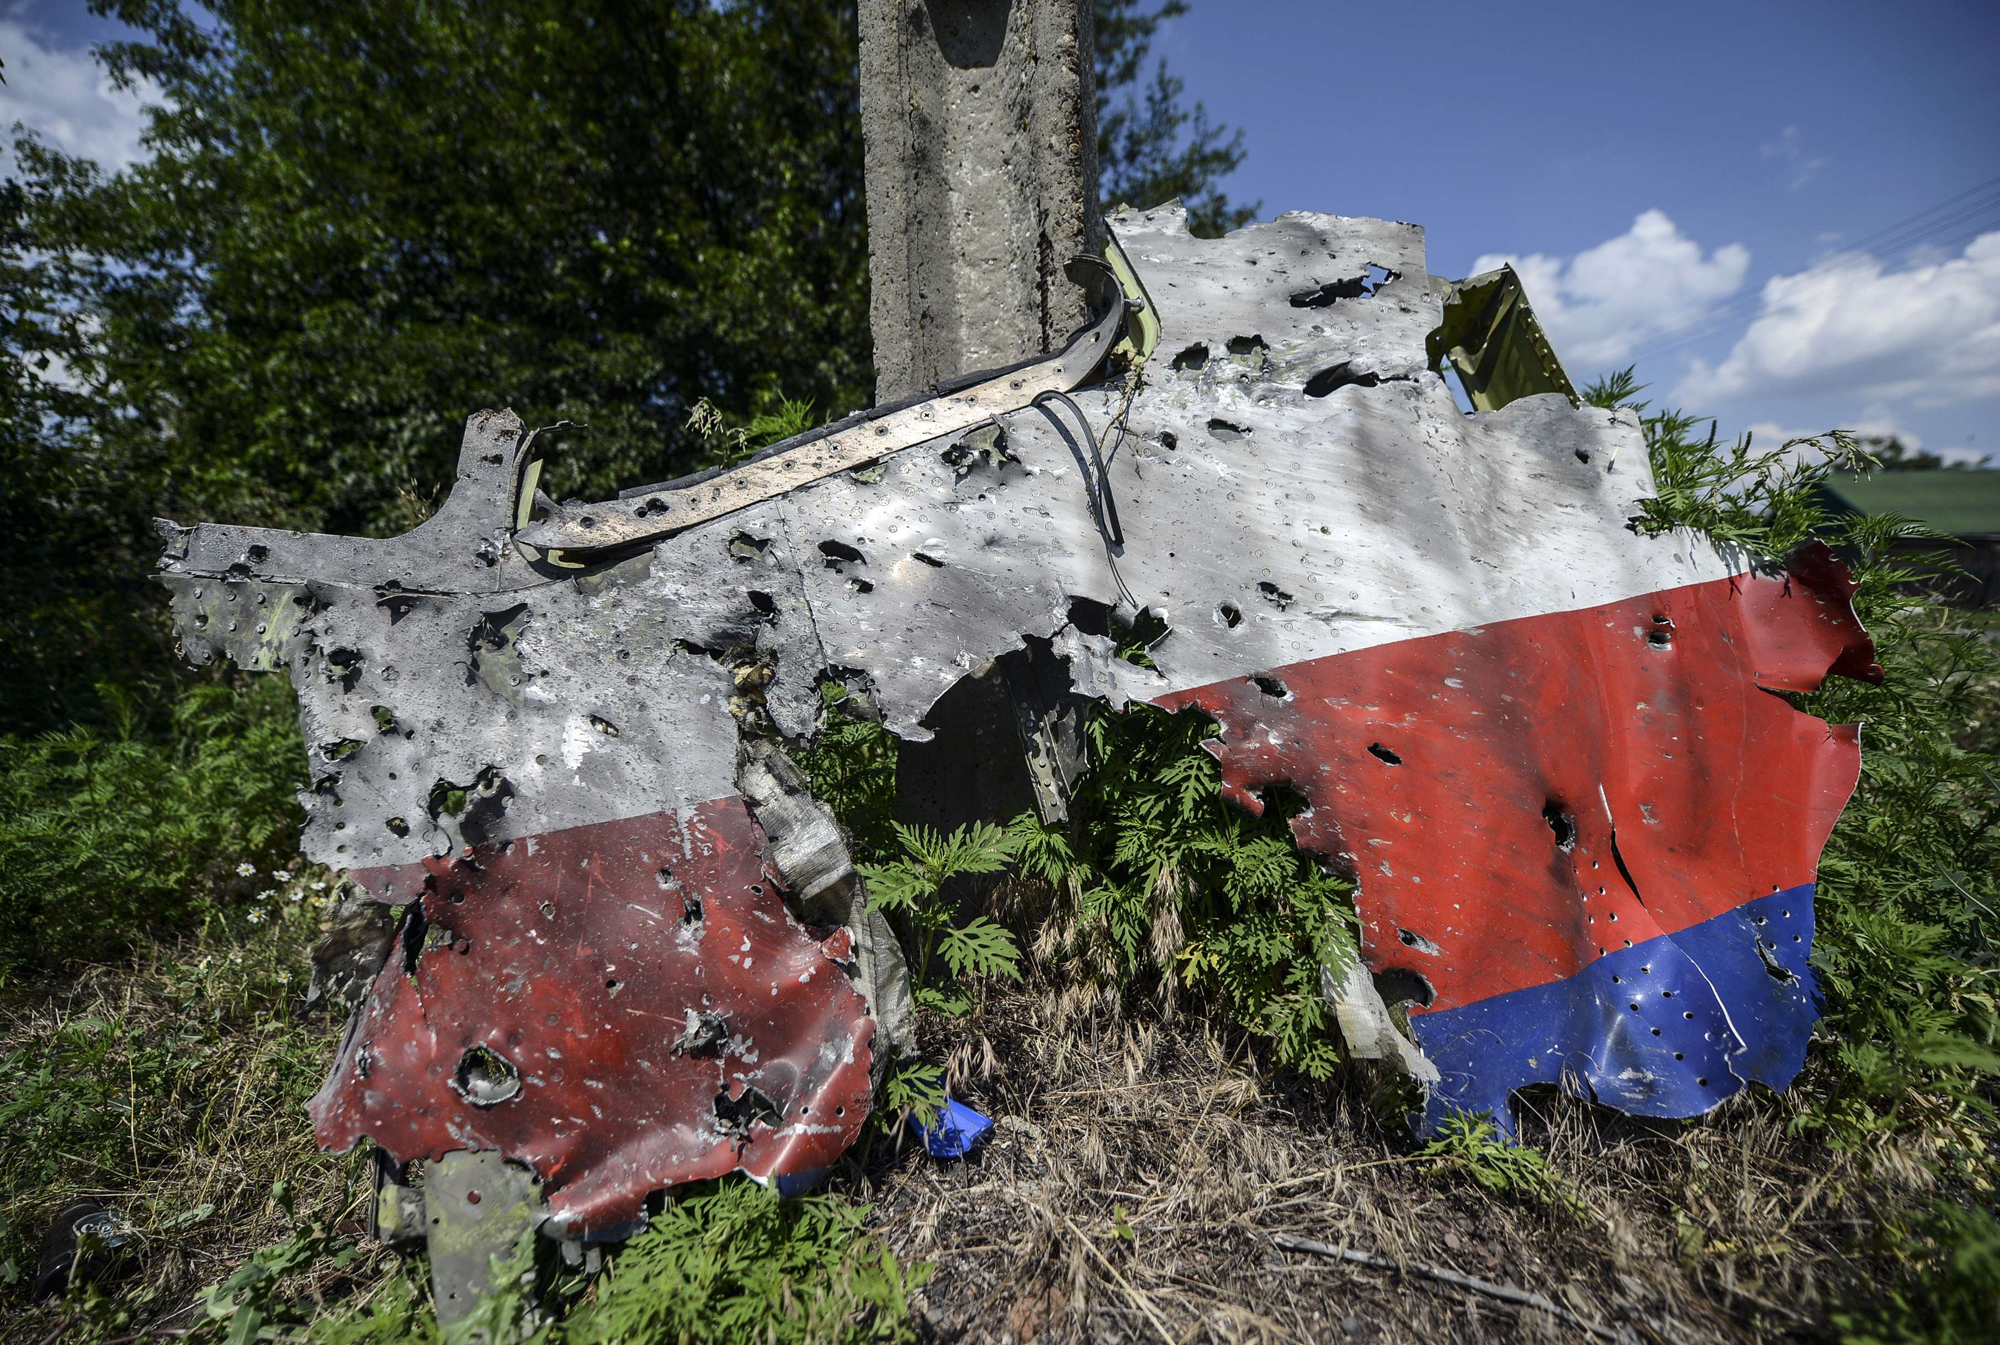 A part of the fuselage of the downed Malaysia Airlines flight MH17 is pictured in a field near the village of Grabove, in the Donetsk region, on July 23, 2014. (Bulent Kilic—AFP/Getty Images)